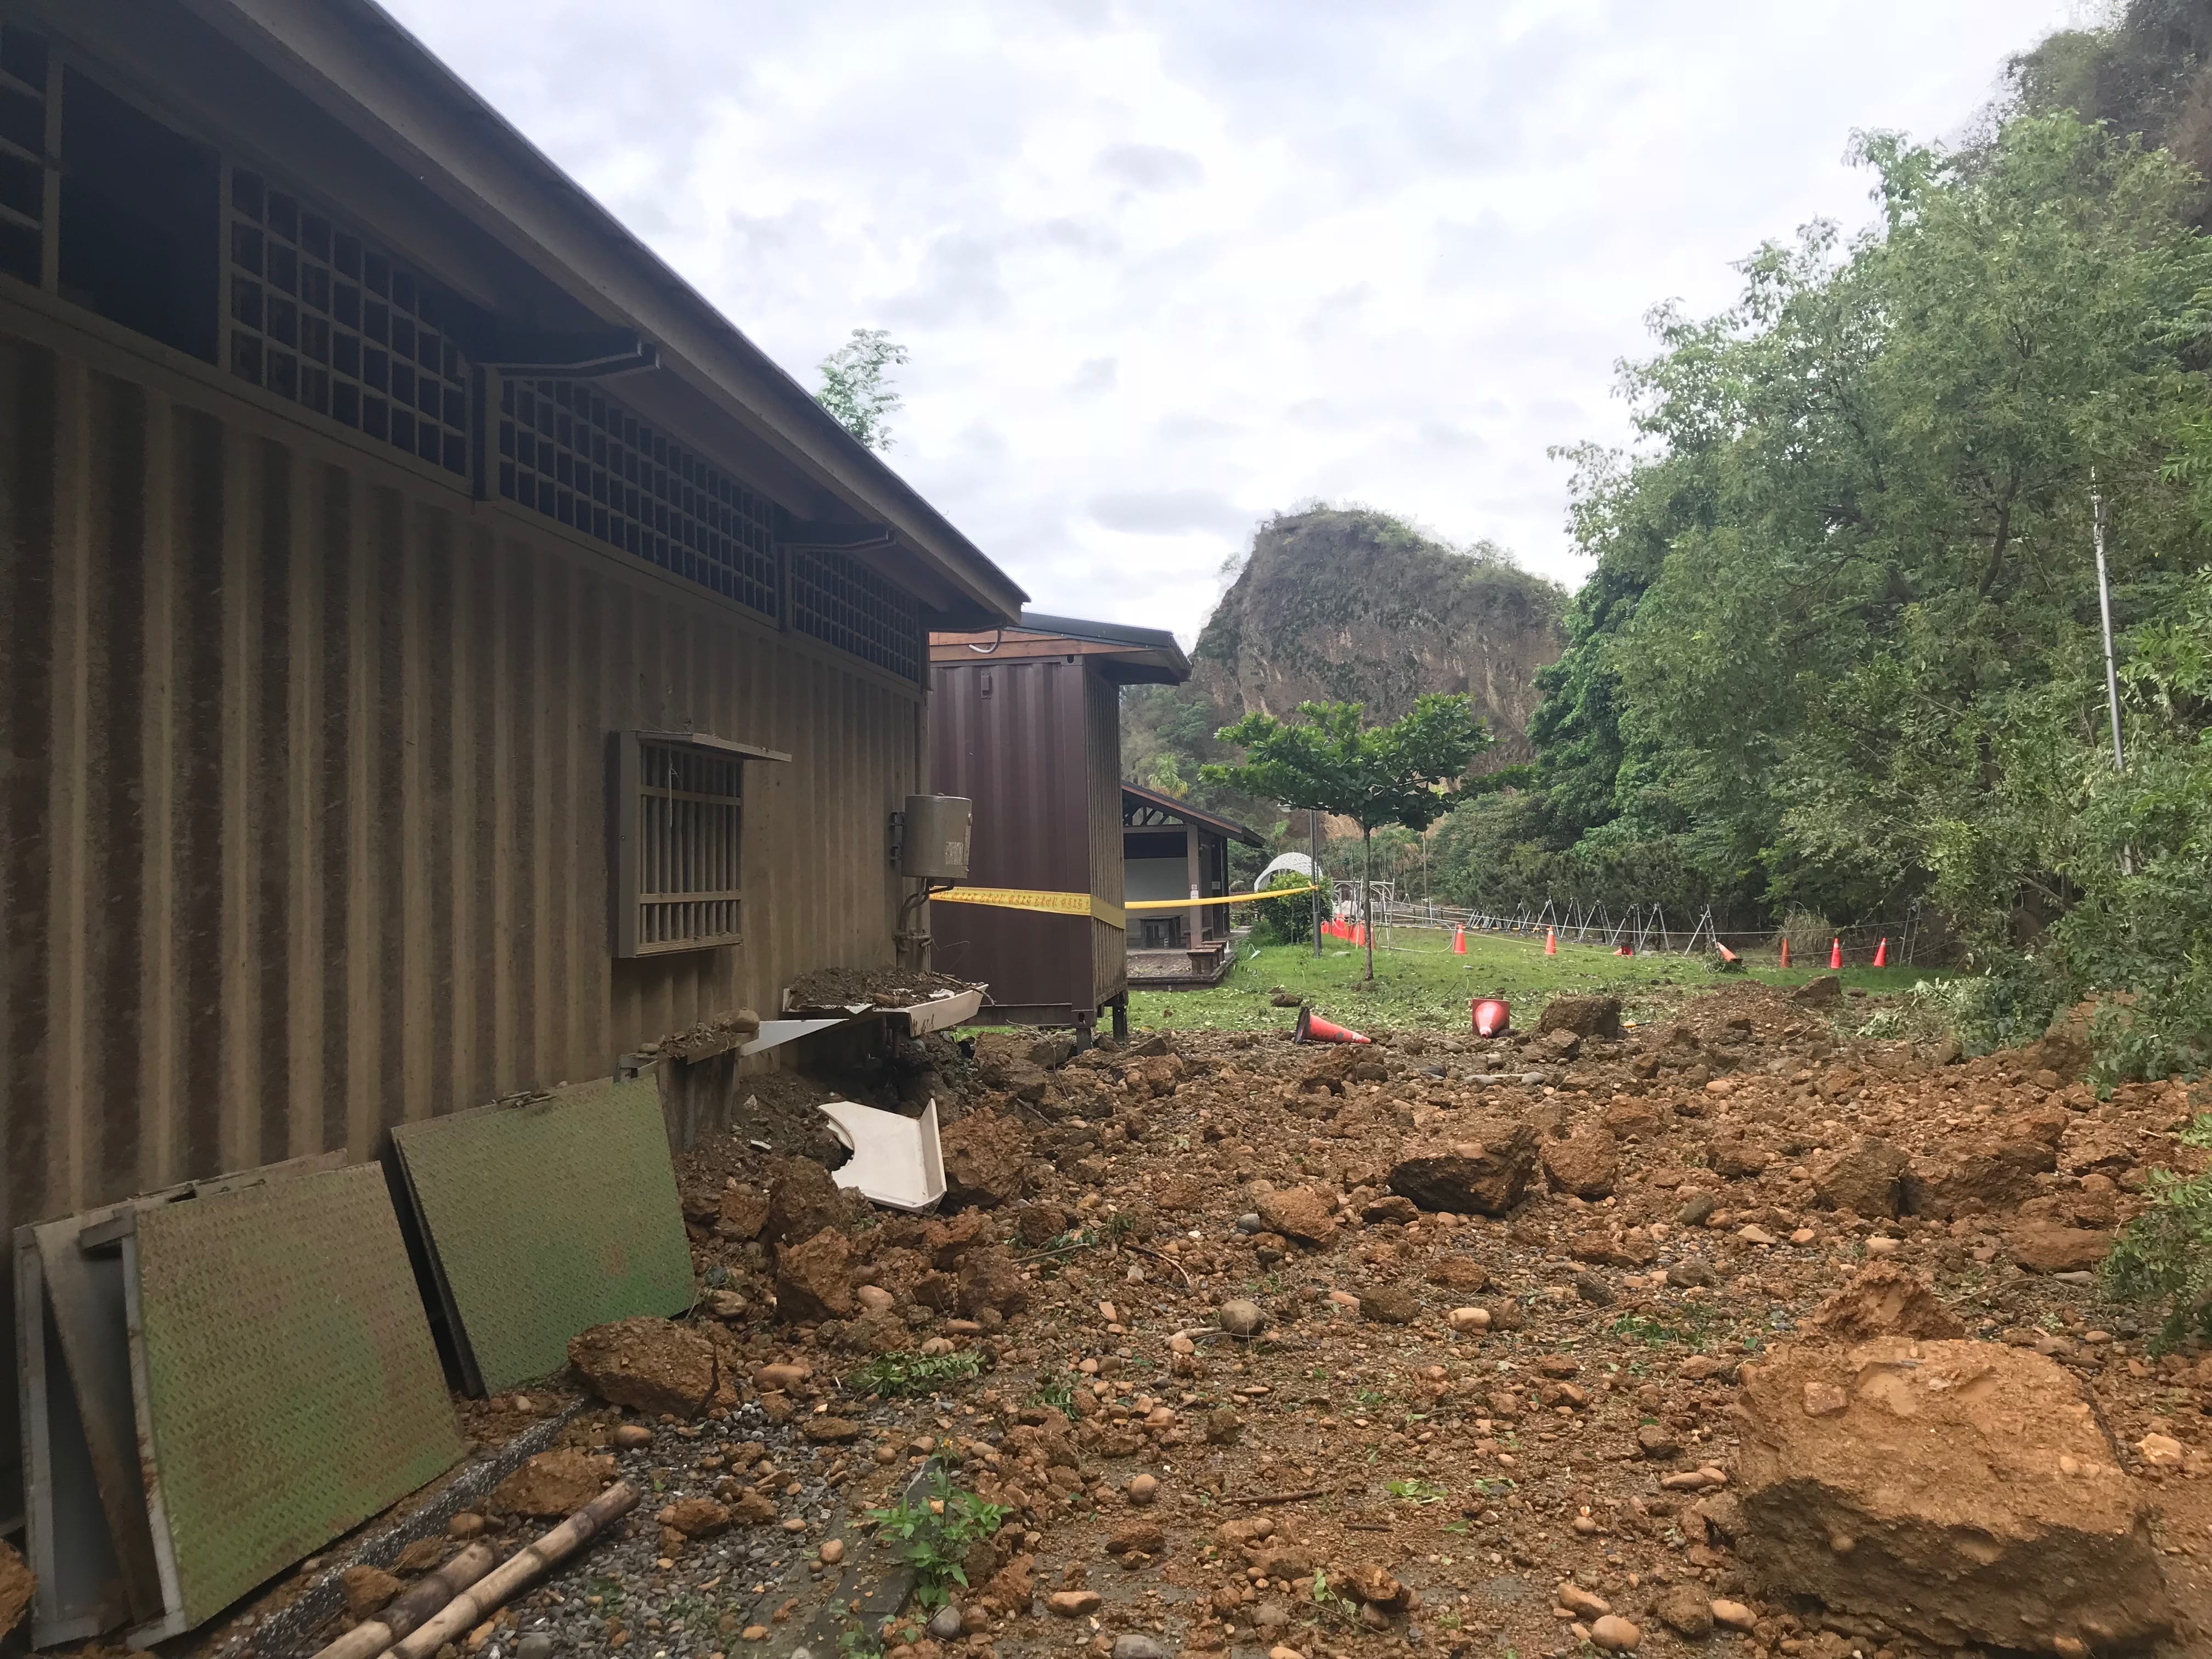 Due to days of torrential rain, rocks are falling from the hills beside Shibaluohan Service Area. Please do not get near them to stay safe.